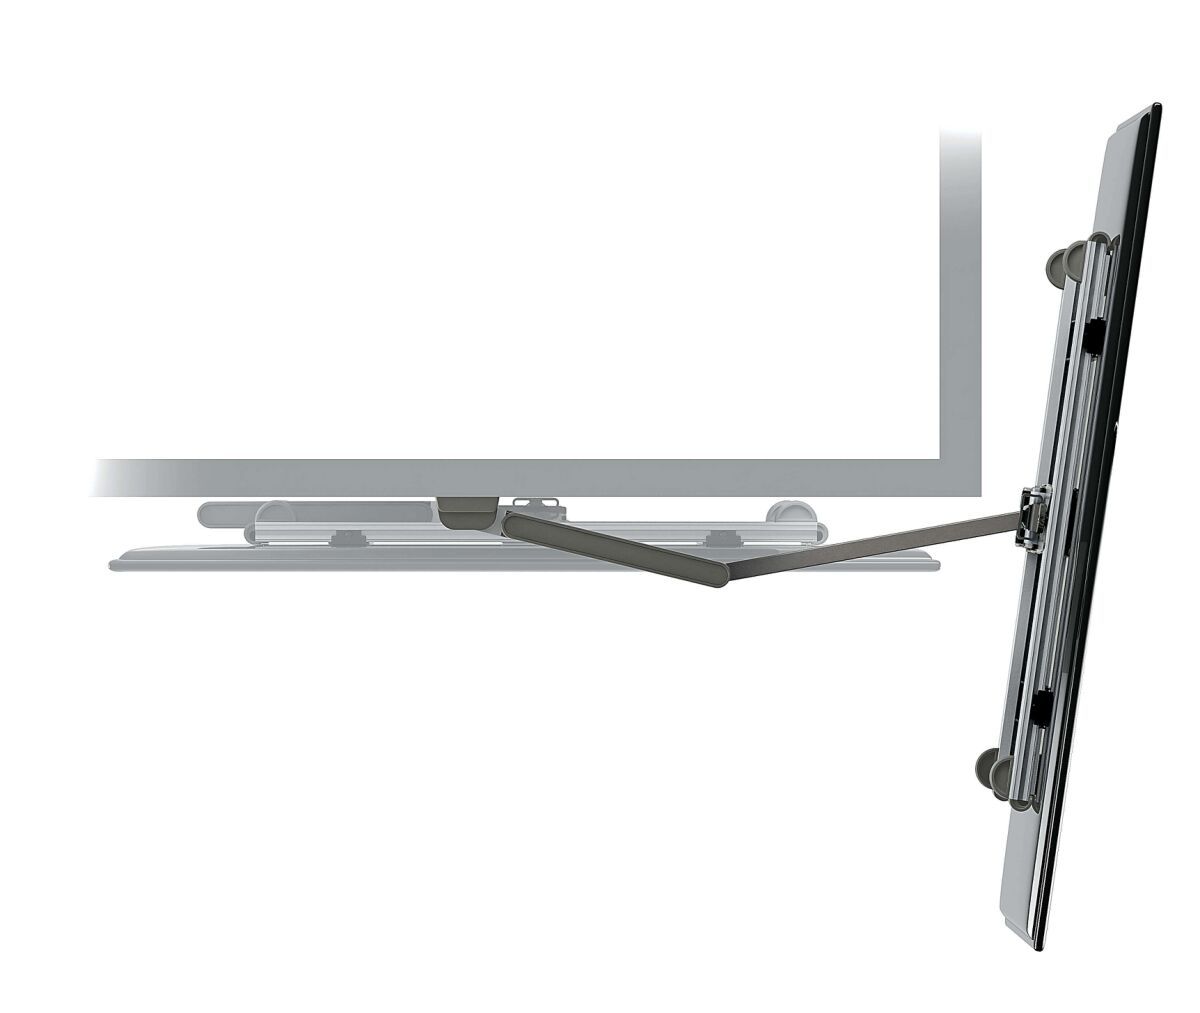 Vogel's THIN 245 UltraThin Full-Motion TV Wall Mount (white) - Suitable for 26 up to 55 inch TVs - Full motion (up to 180°) - Tilt up to 20° - Top view